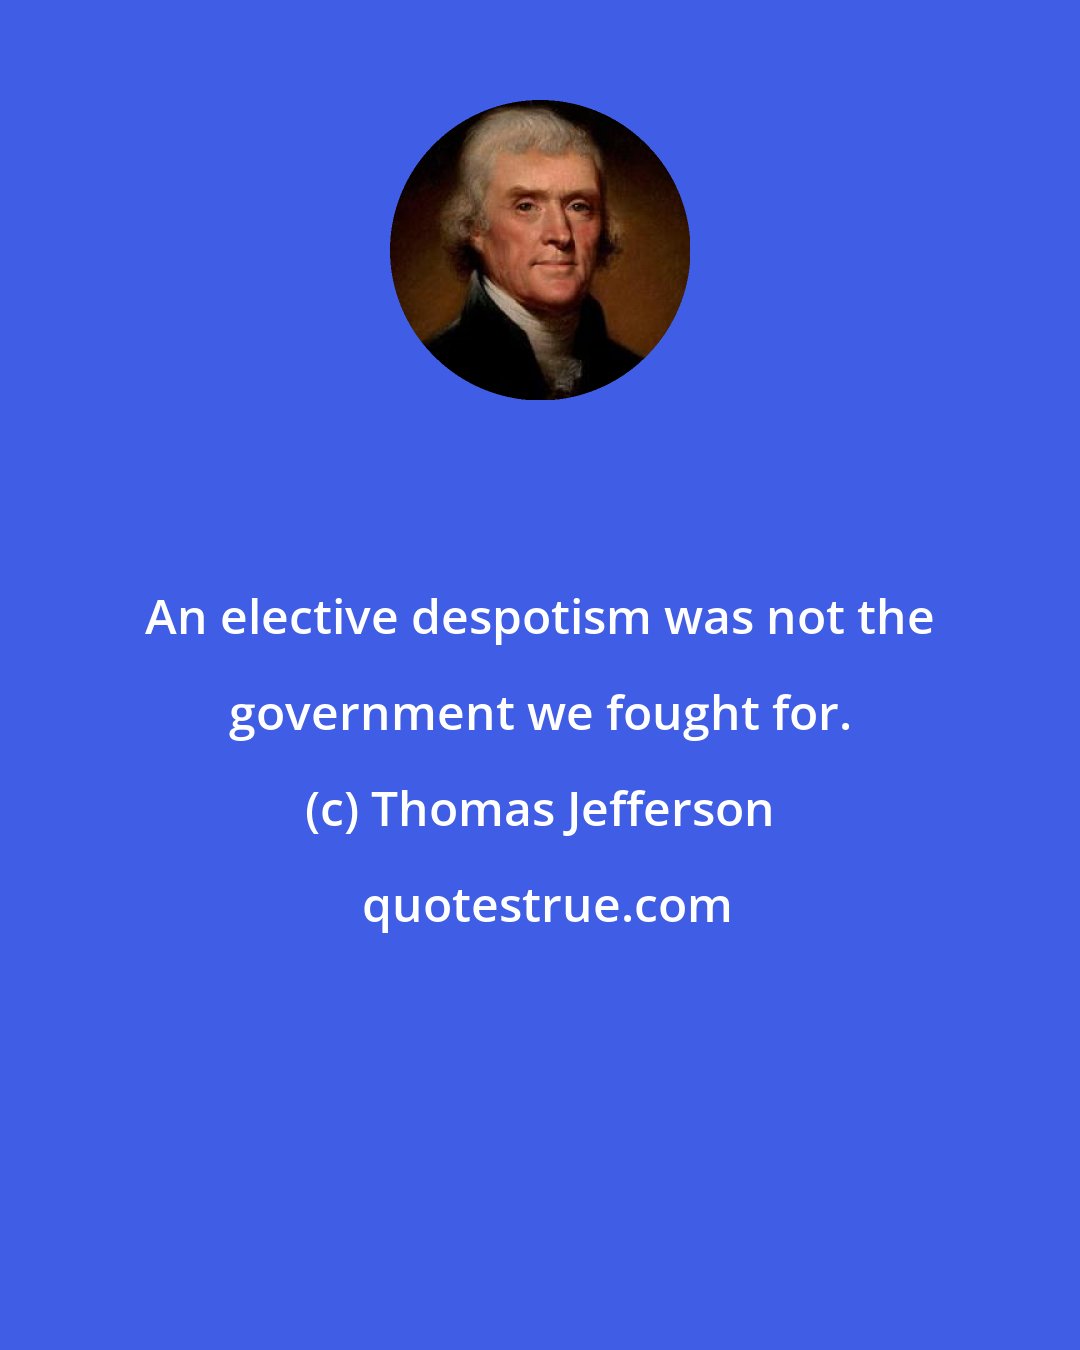 Thomas Jefferson: An elective despotism was not the government we fought for.